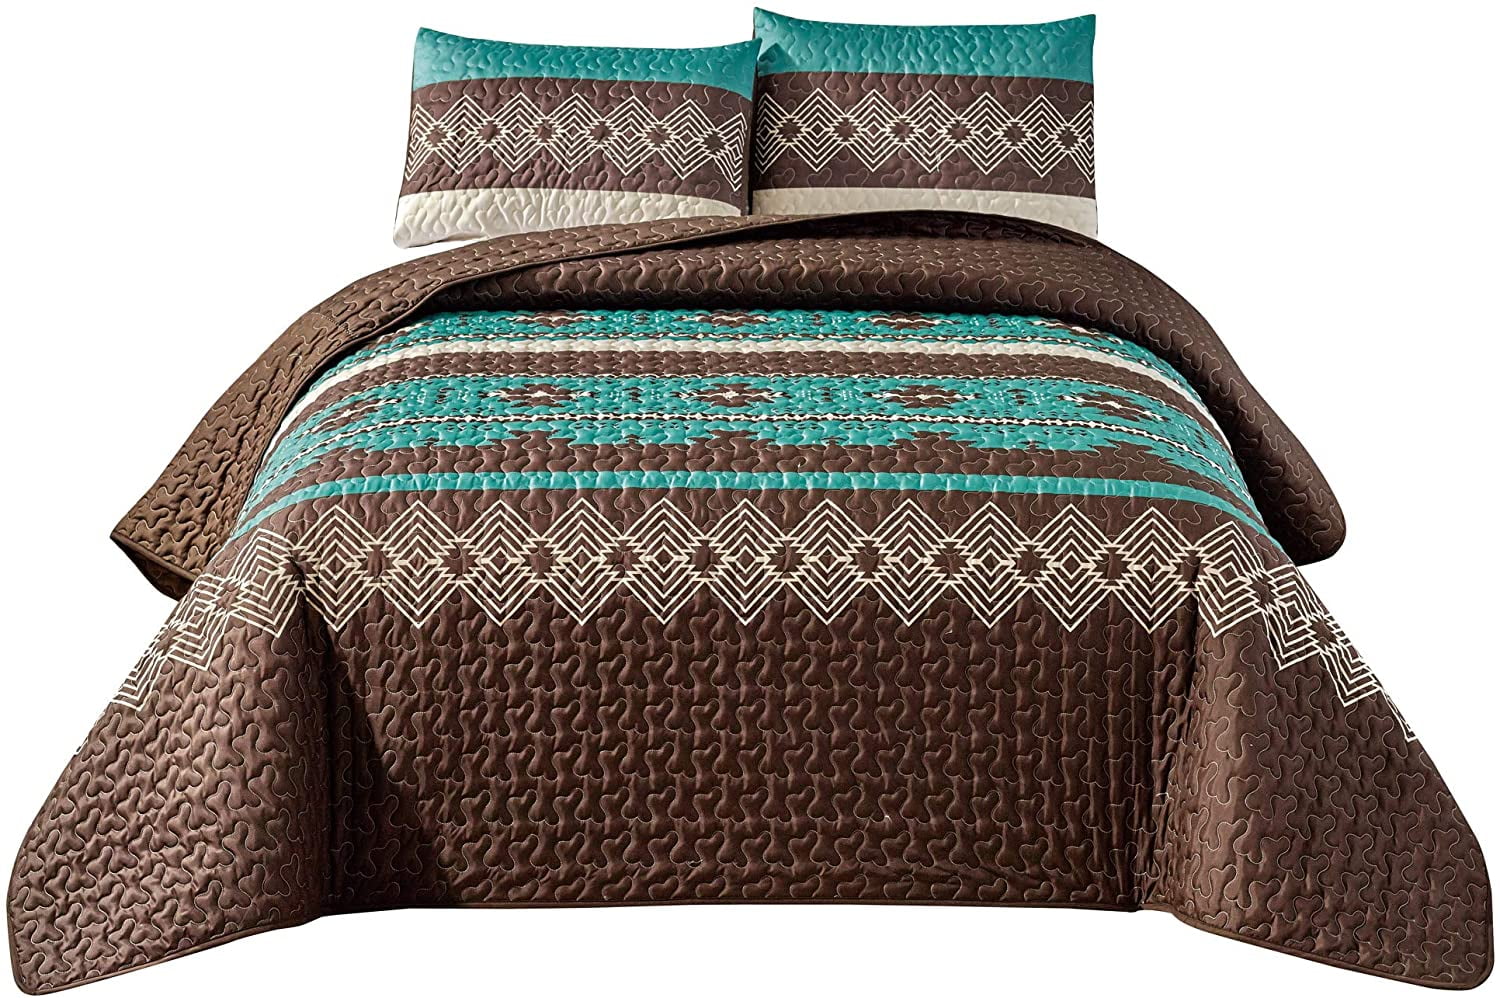 RED GREEN SOUTHWESTERN NATIVE TRIBAL Queen QUILT SET SOUTHWEST LODGE Full 